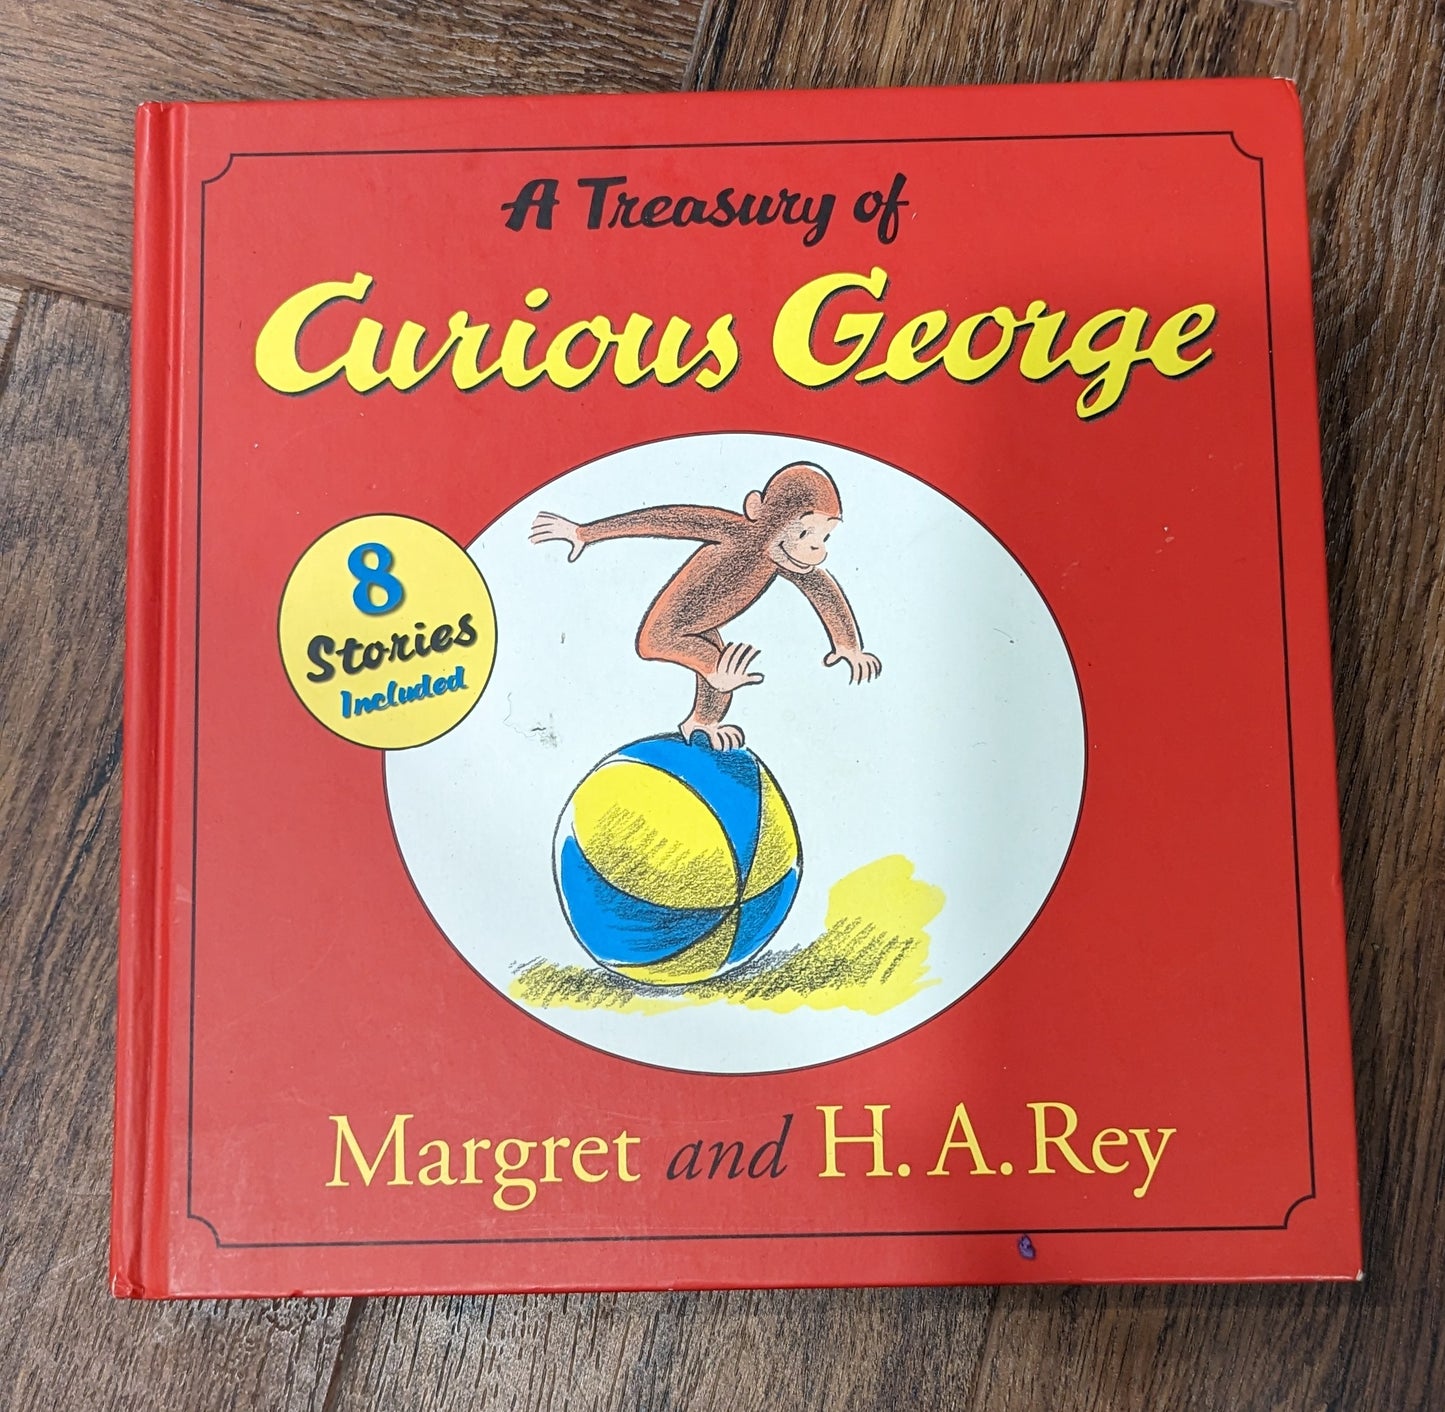 Curious George story book